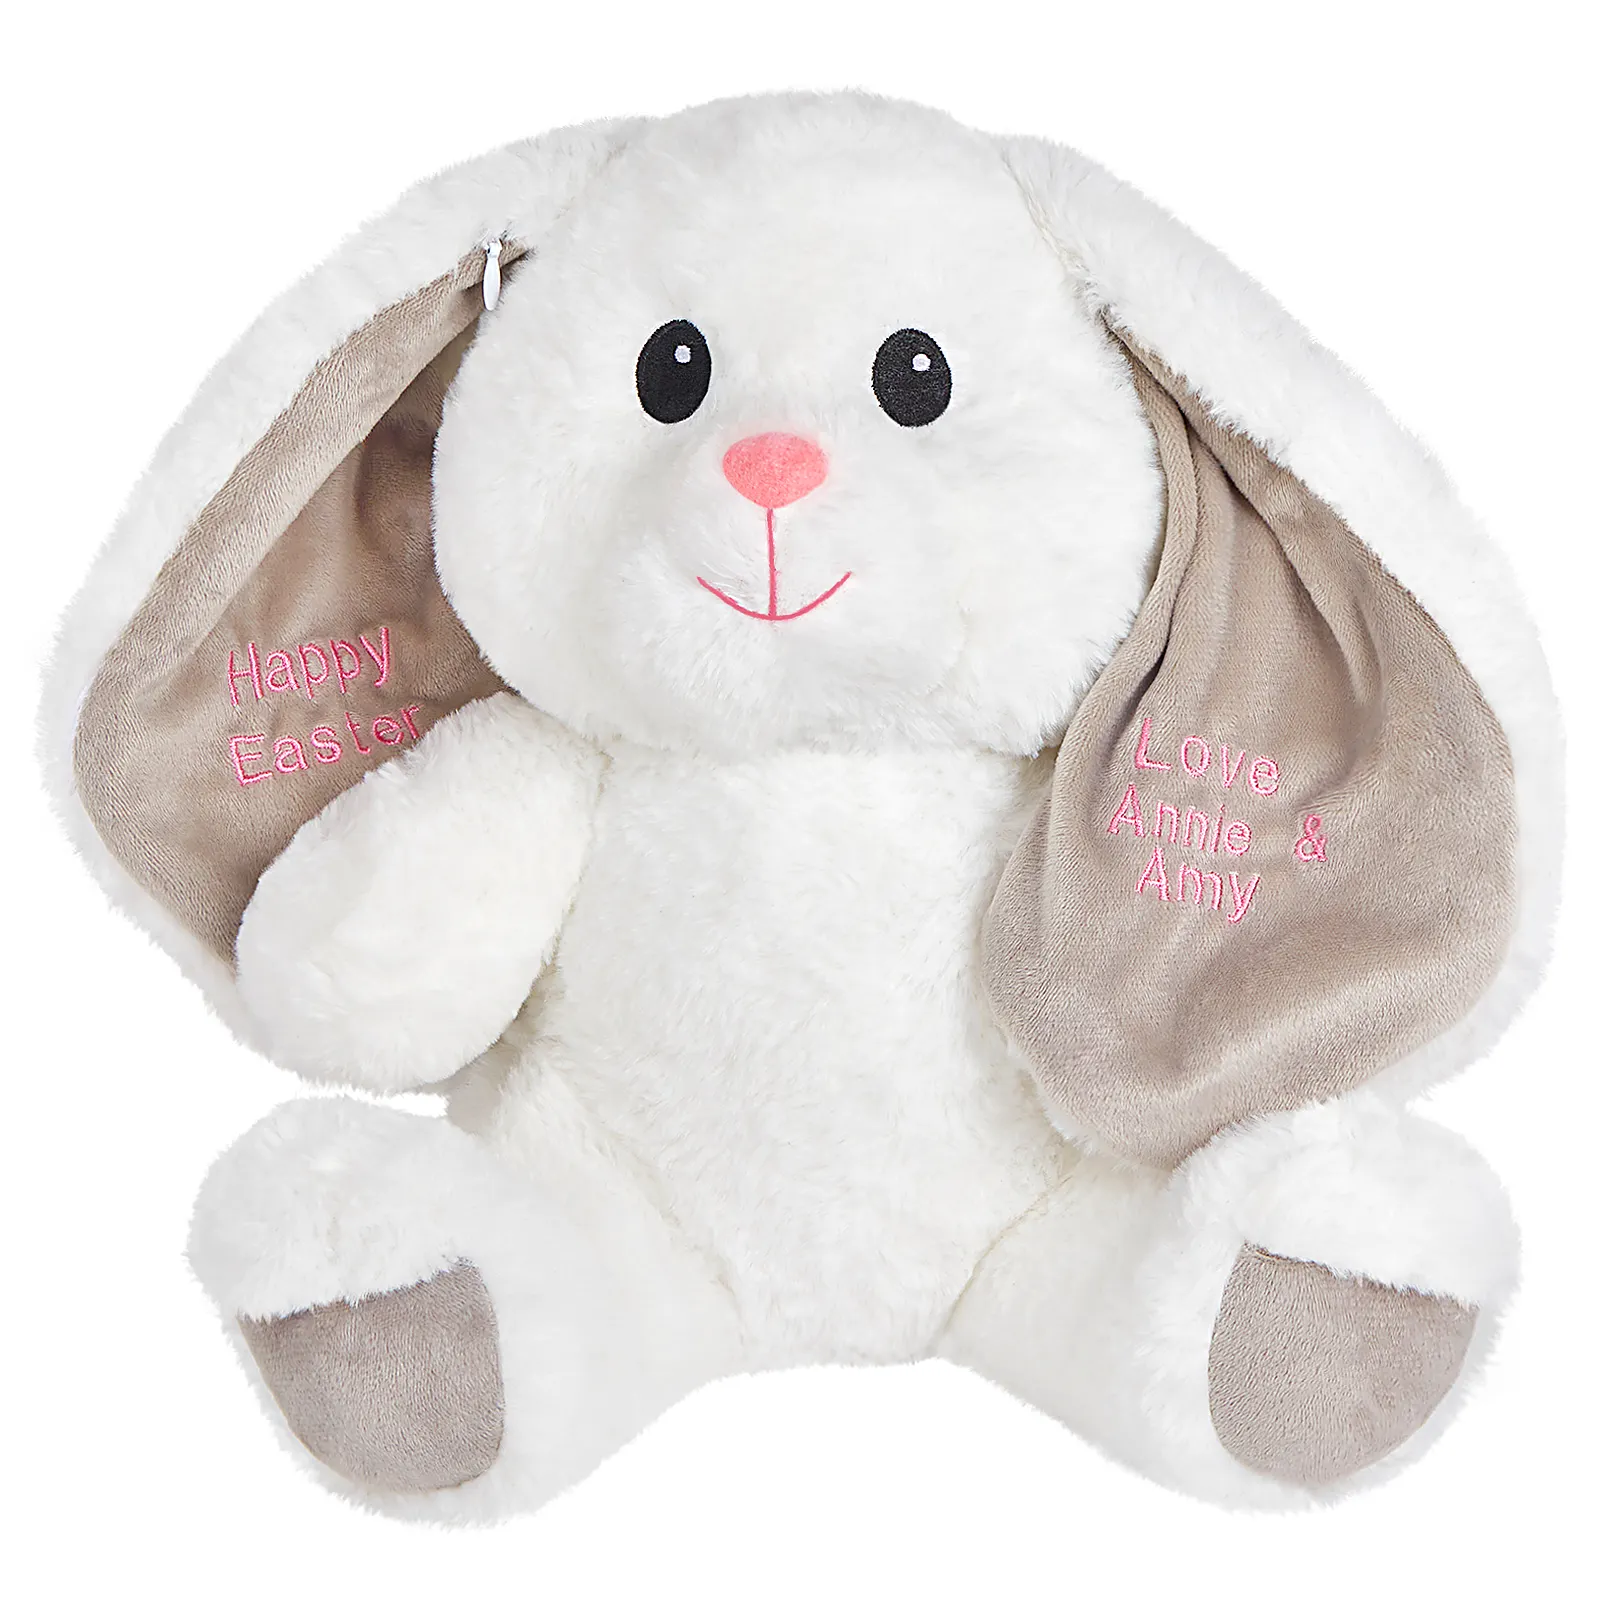 Custom Plush Rabbit Doll Embroidered Name Easter Bunny Toy Personalized Stuffed Animal Soft on Big Ears for Gifts